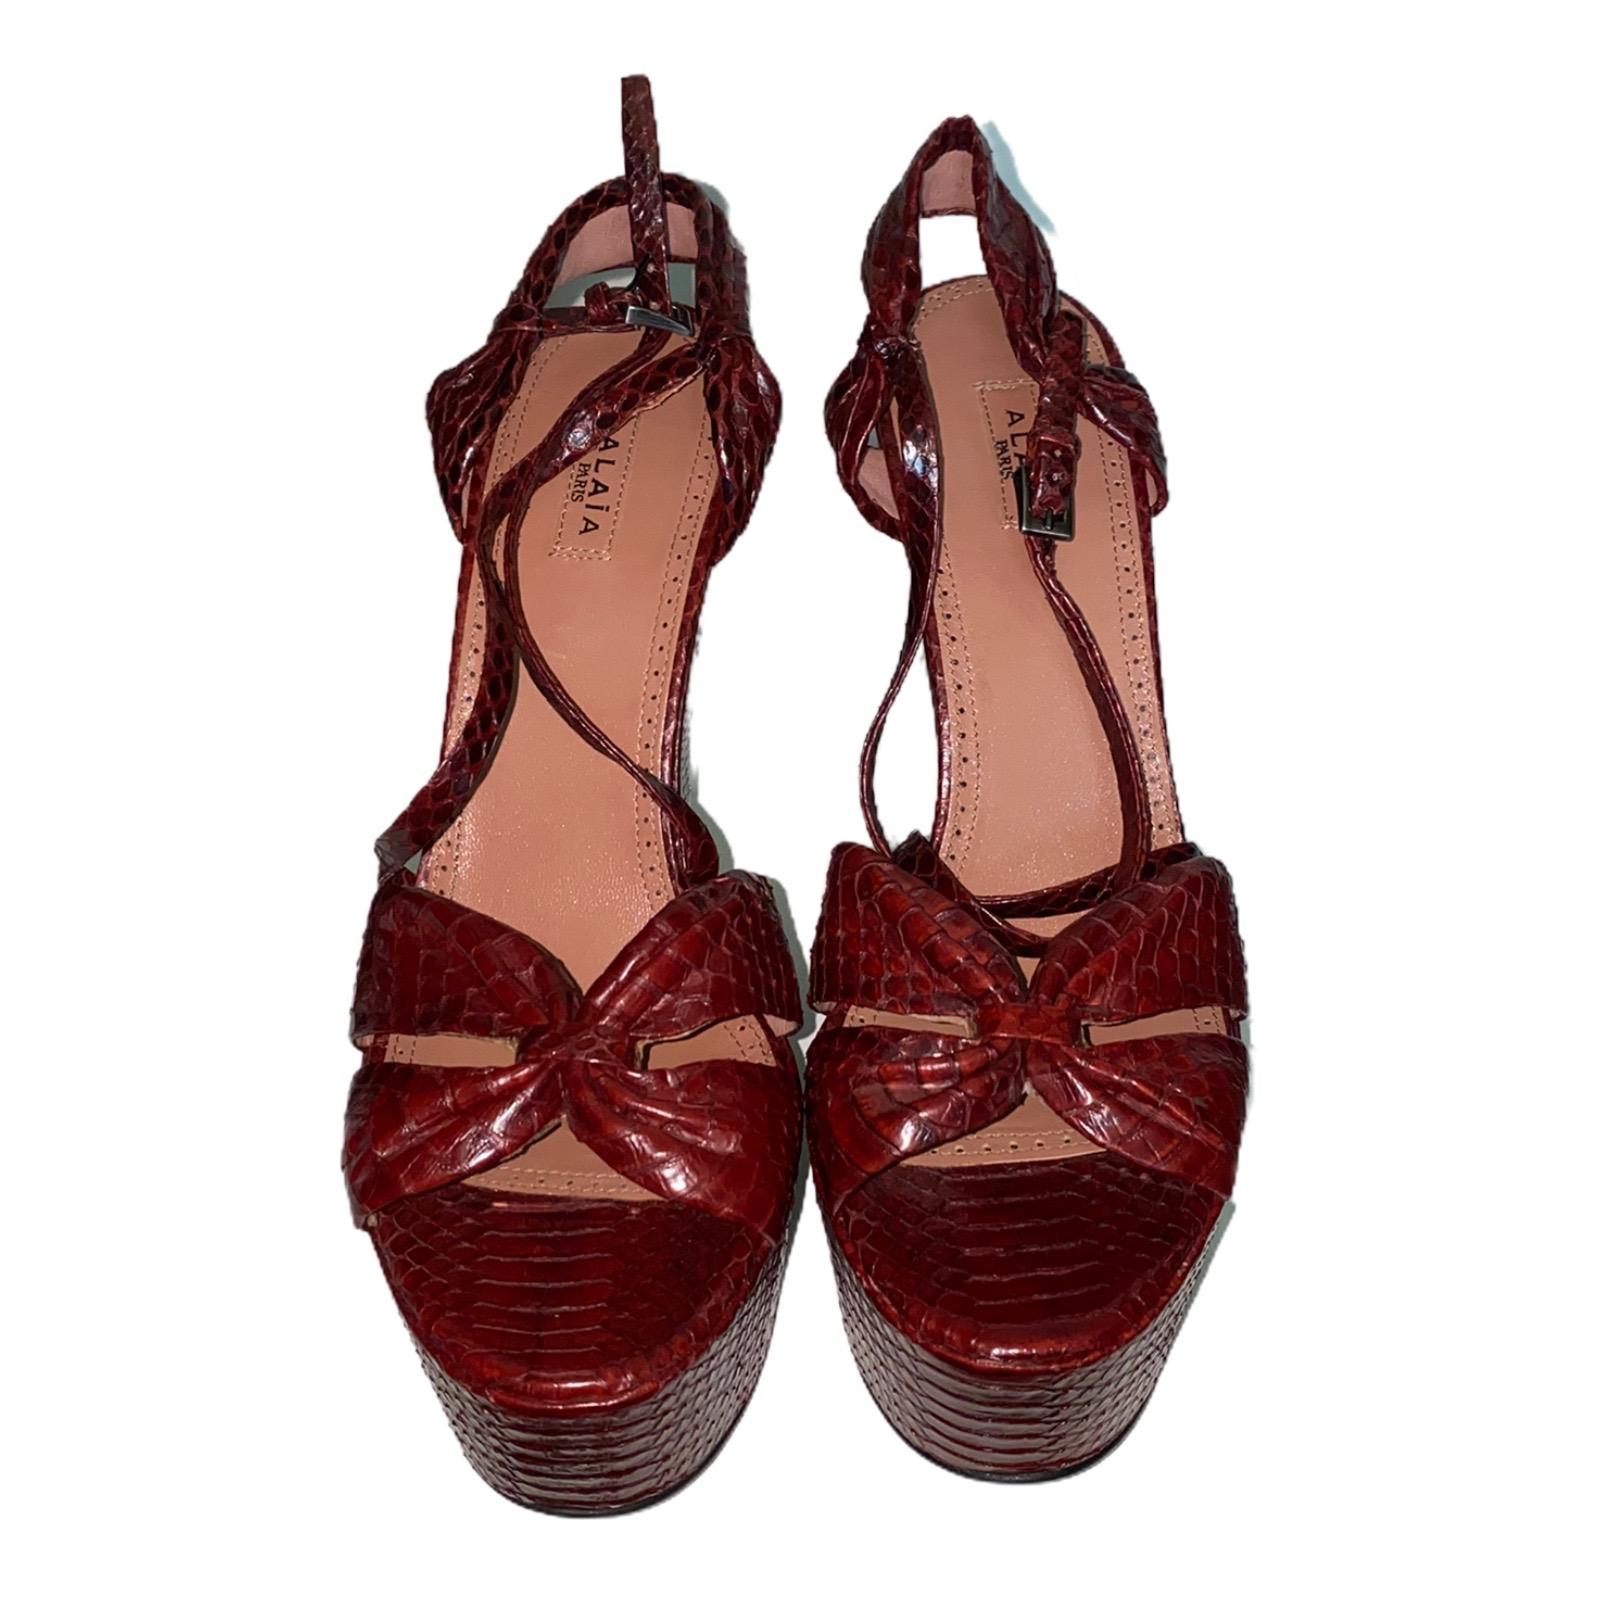 An AZZEDINE ALAIA classic signature piece that will last you for years
This gorgeous pair of wedges made out of finest exotic skin
Closure discreetly engraved with 